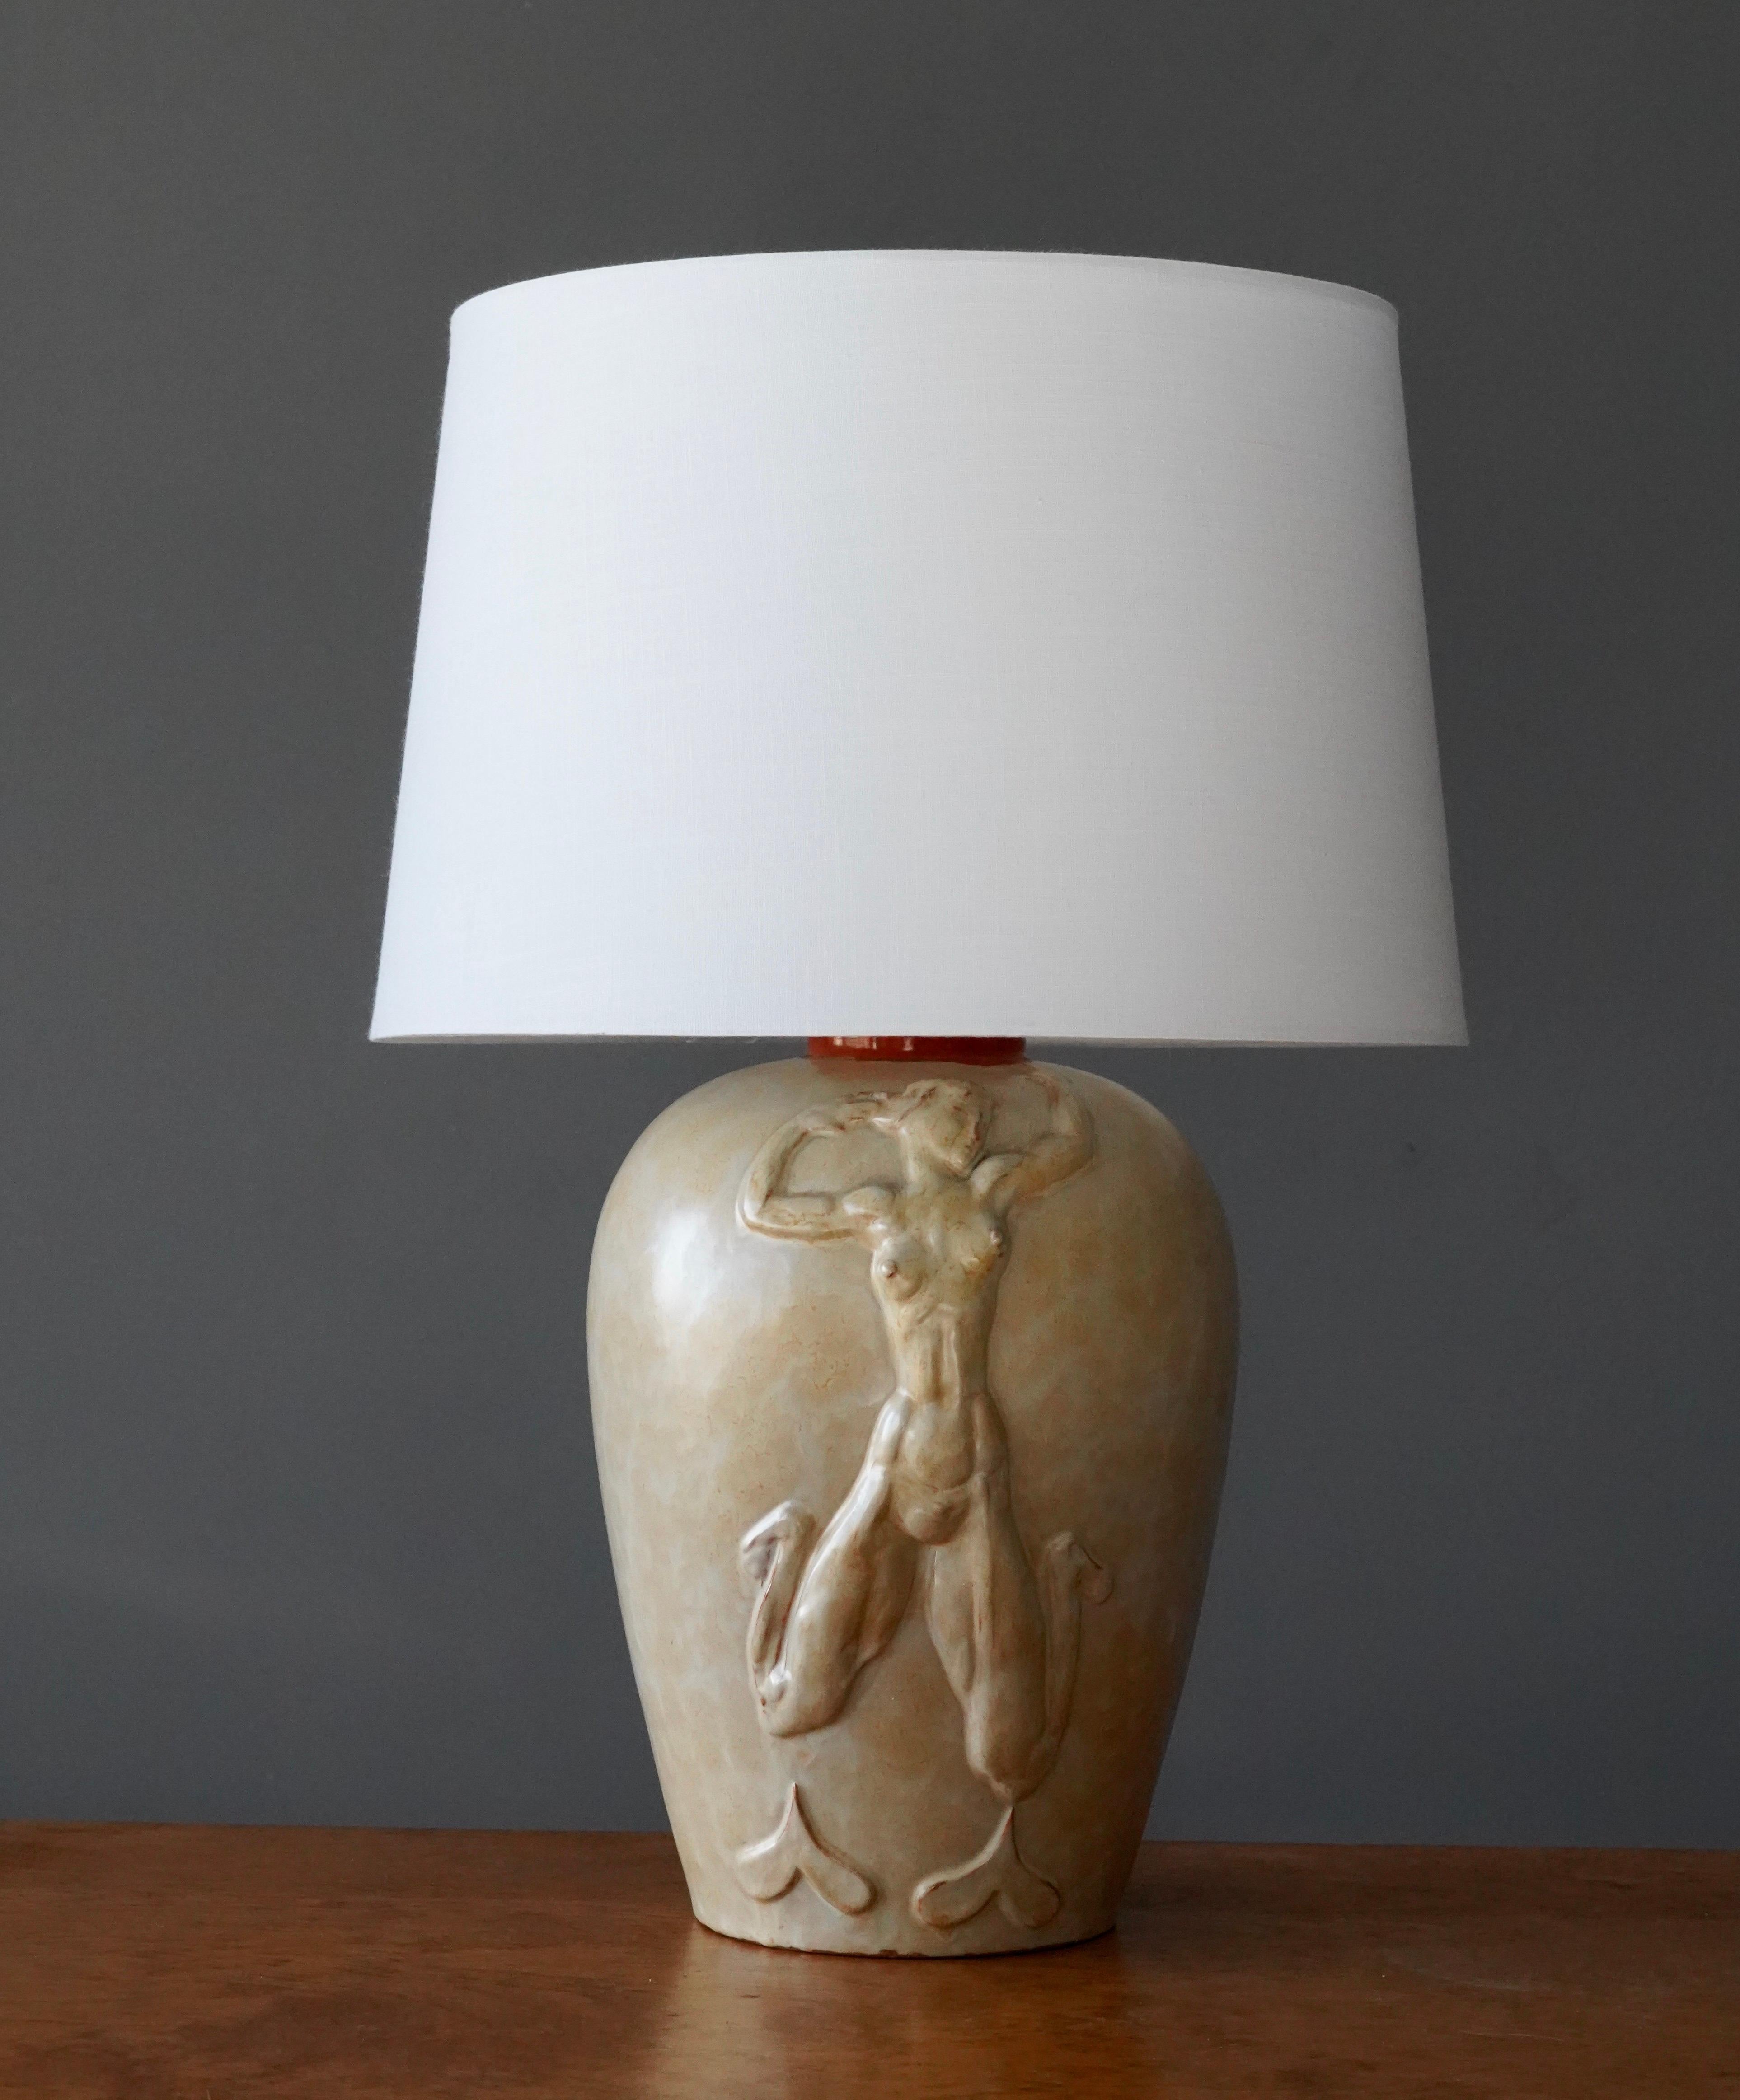 A table lamp, designed by Swedish Sculptor Einar Luterkort (1905 - 1981).
 
Motif to base illustrating a female nude form.

Dimensions listed are without lampshade. 
Dimensions with shade: height is 21.5 inches, width is 15 inches.
Dimensions